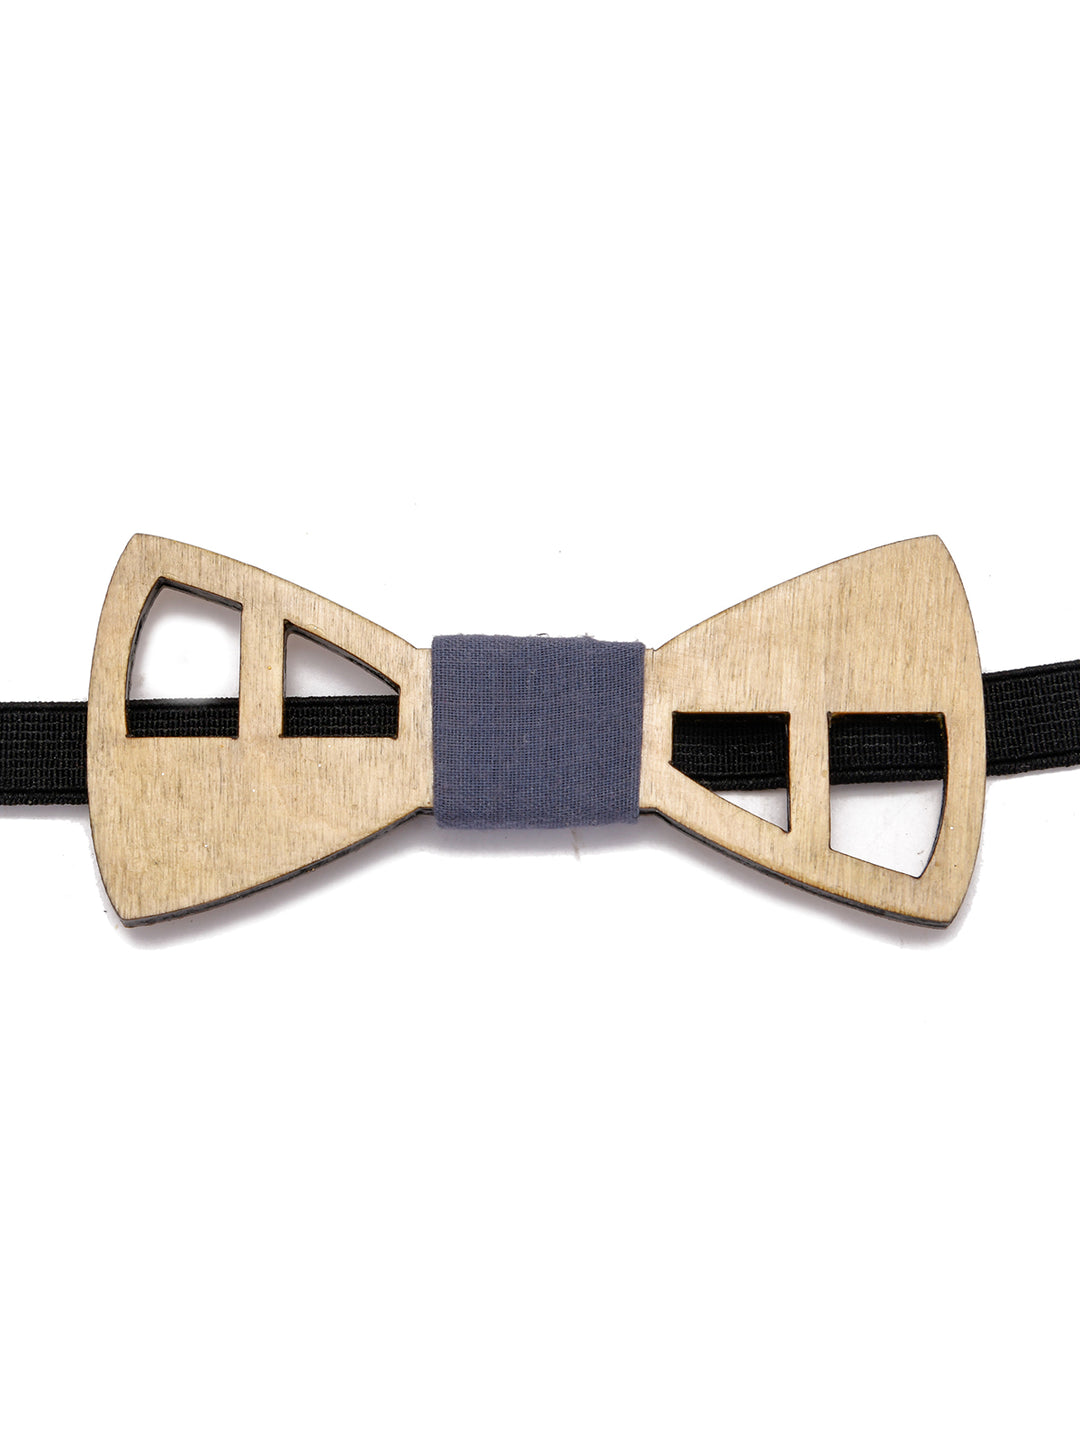 Shelby Wooden Bow Tie